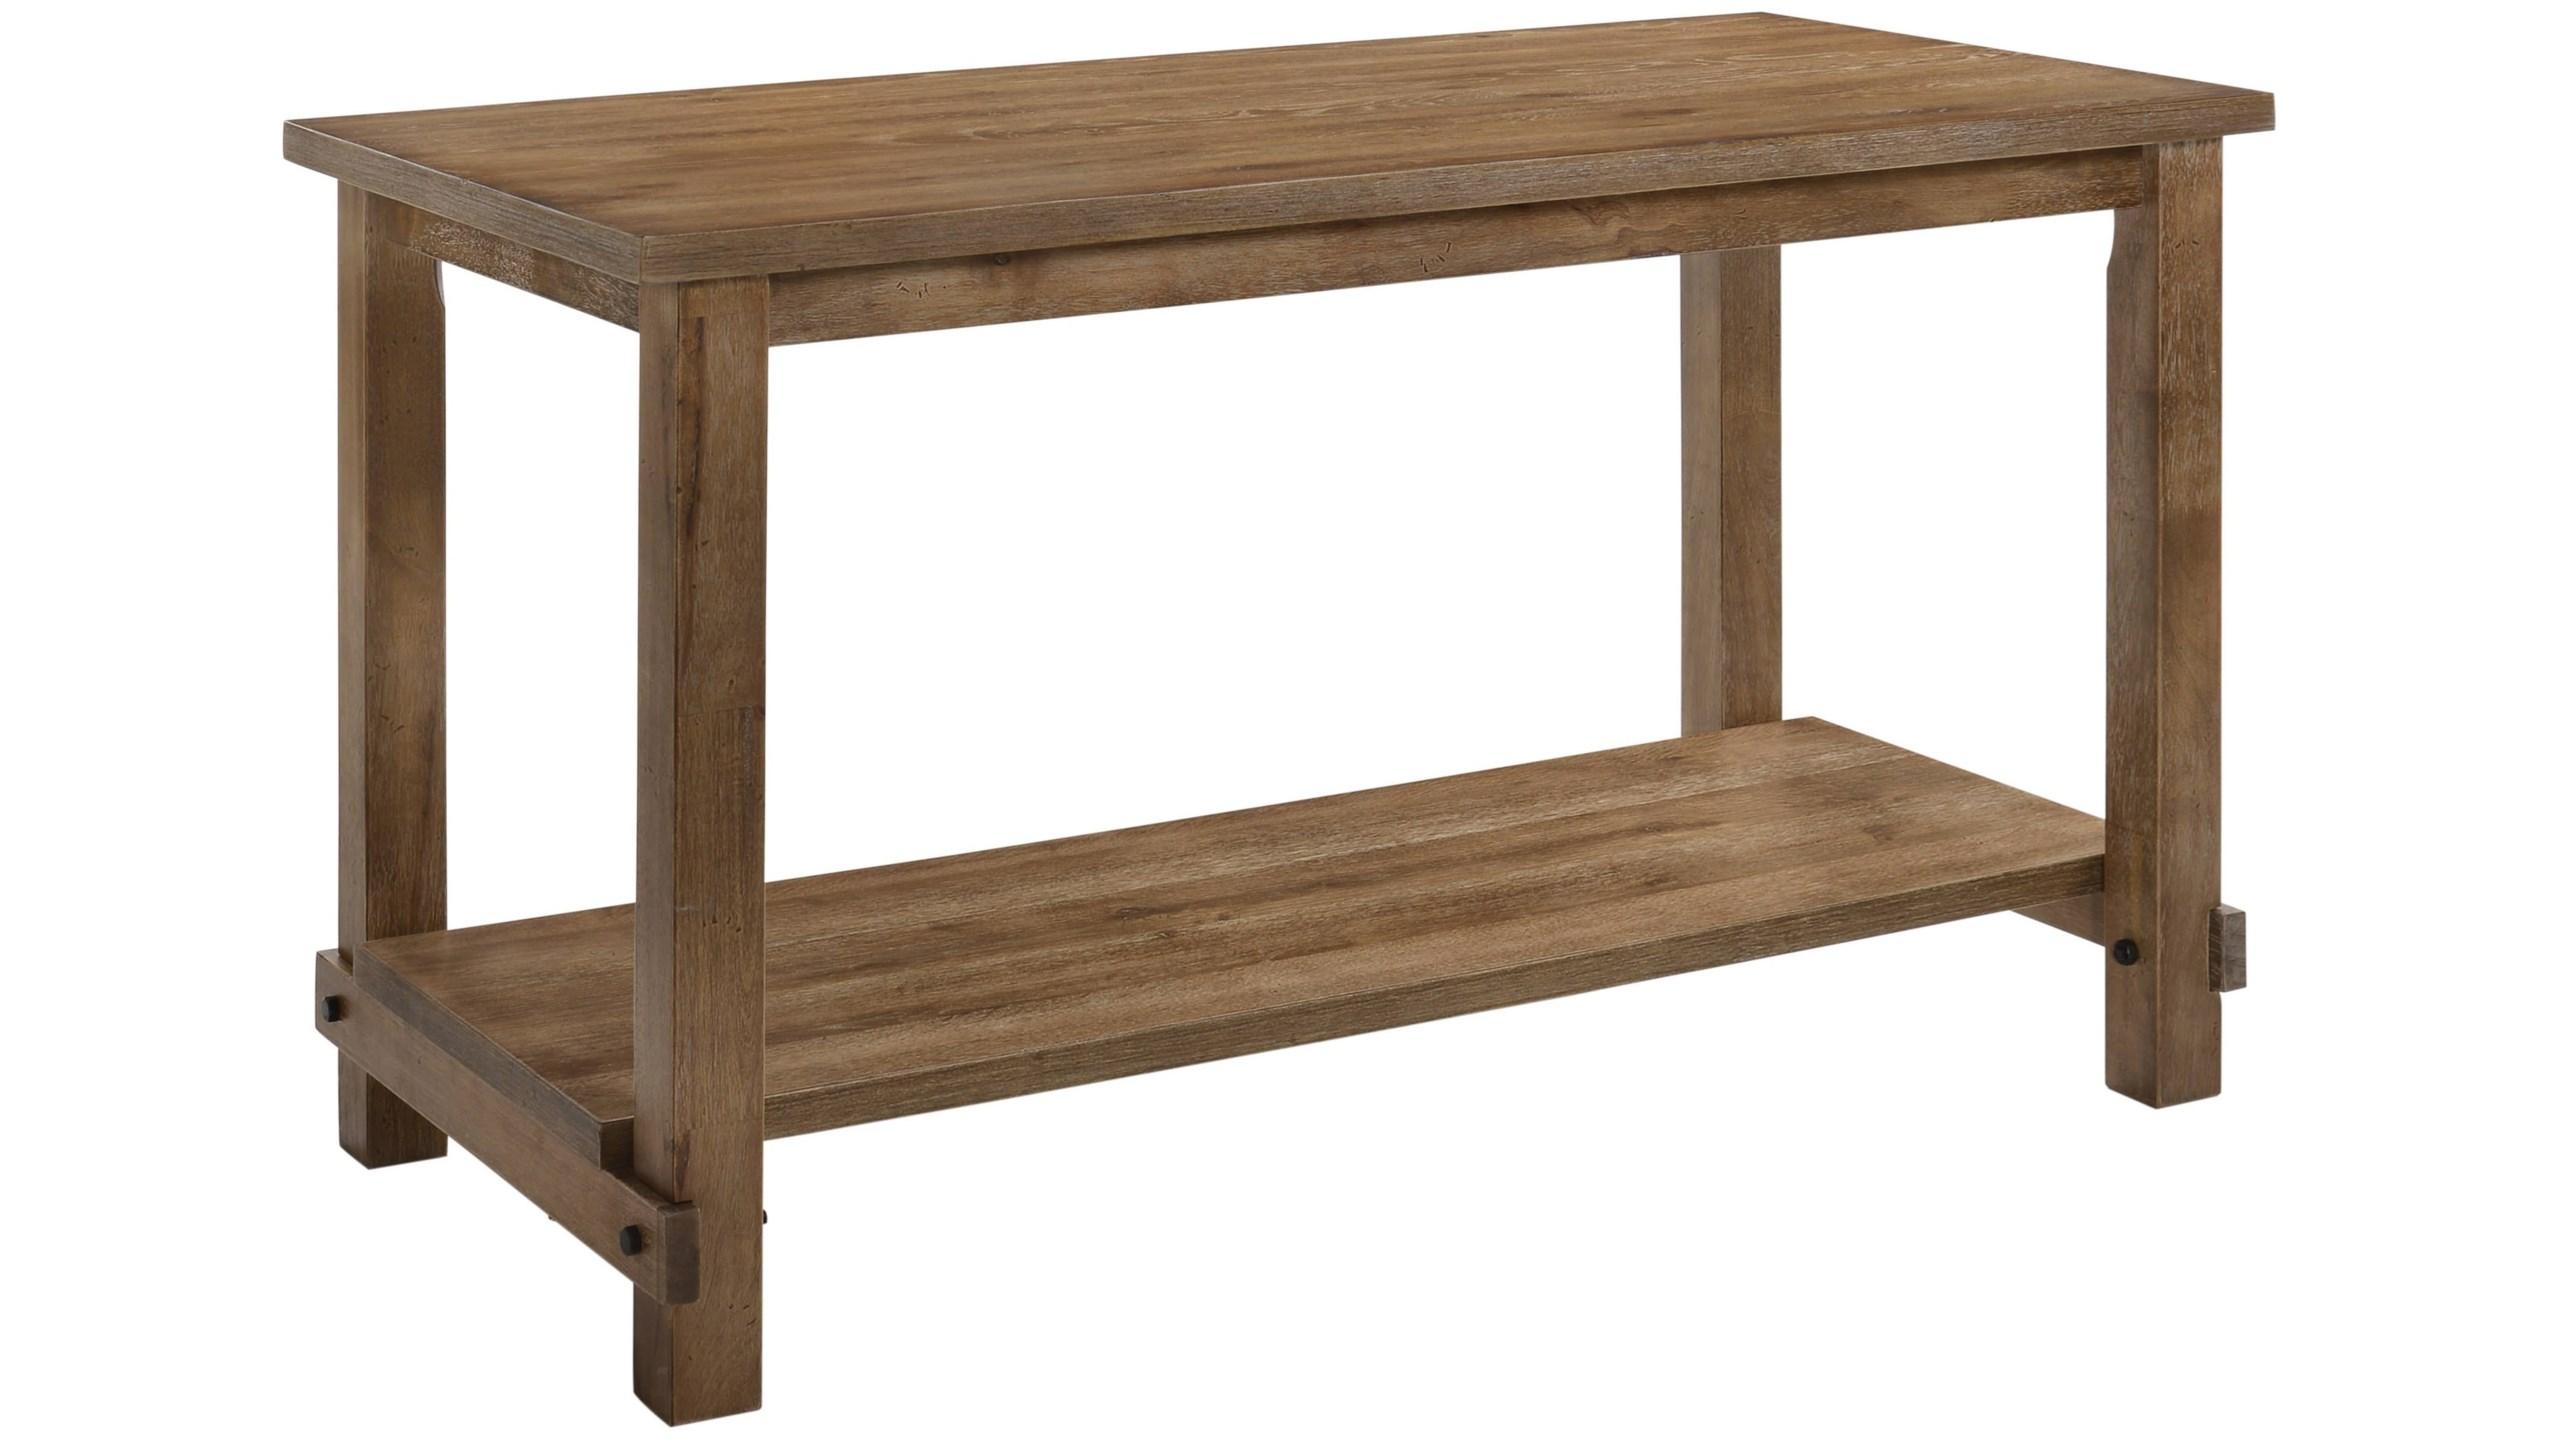 Classic, Traditional, Farmhouse Counter Height Table Martha II 70830 in Brown Oak 